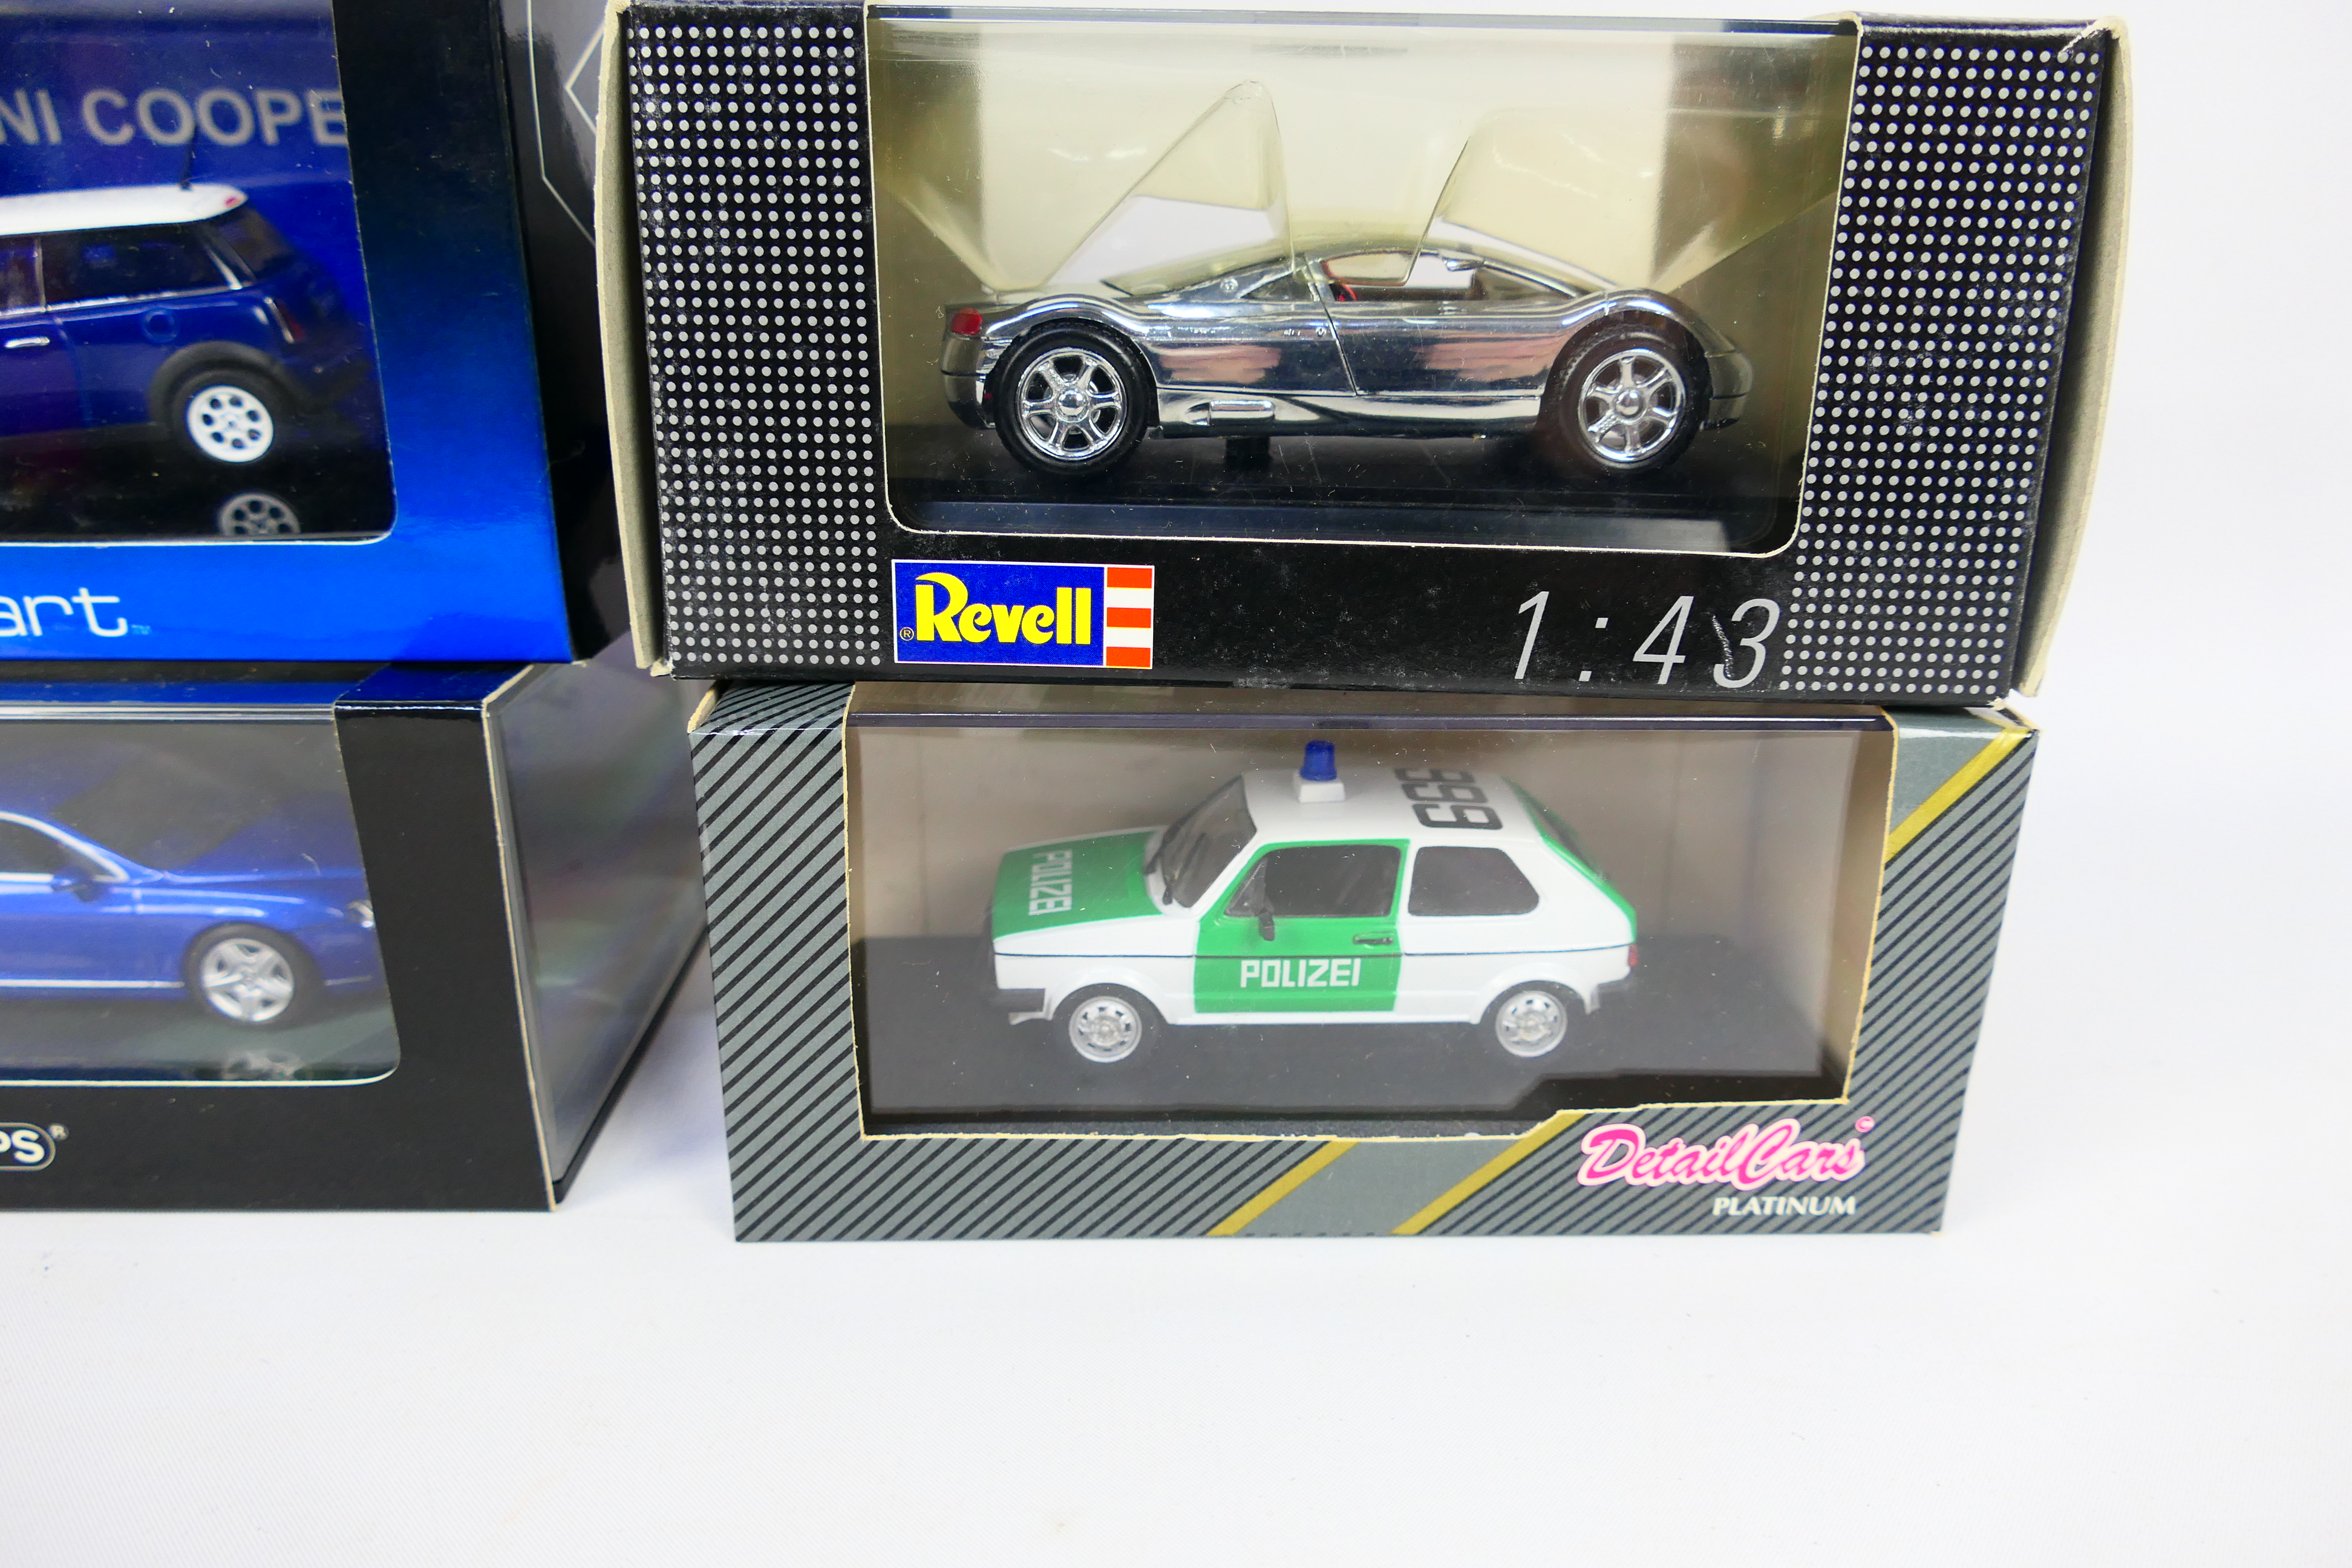 Minichamps - AutoArt - Revell - Detail Cars - Six boxed diecast 1:43 scale model vehicles. - Image 8 of 10